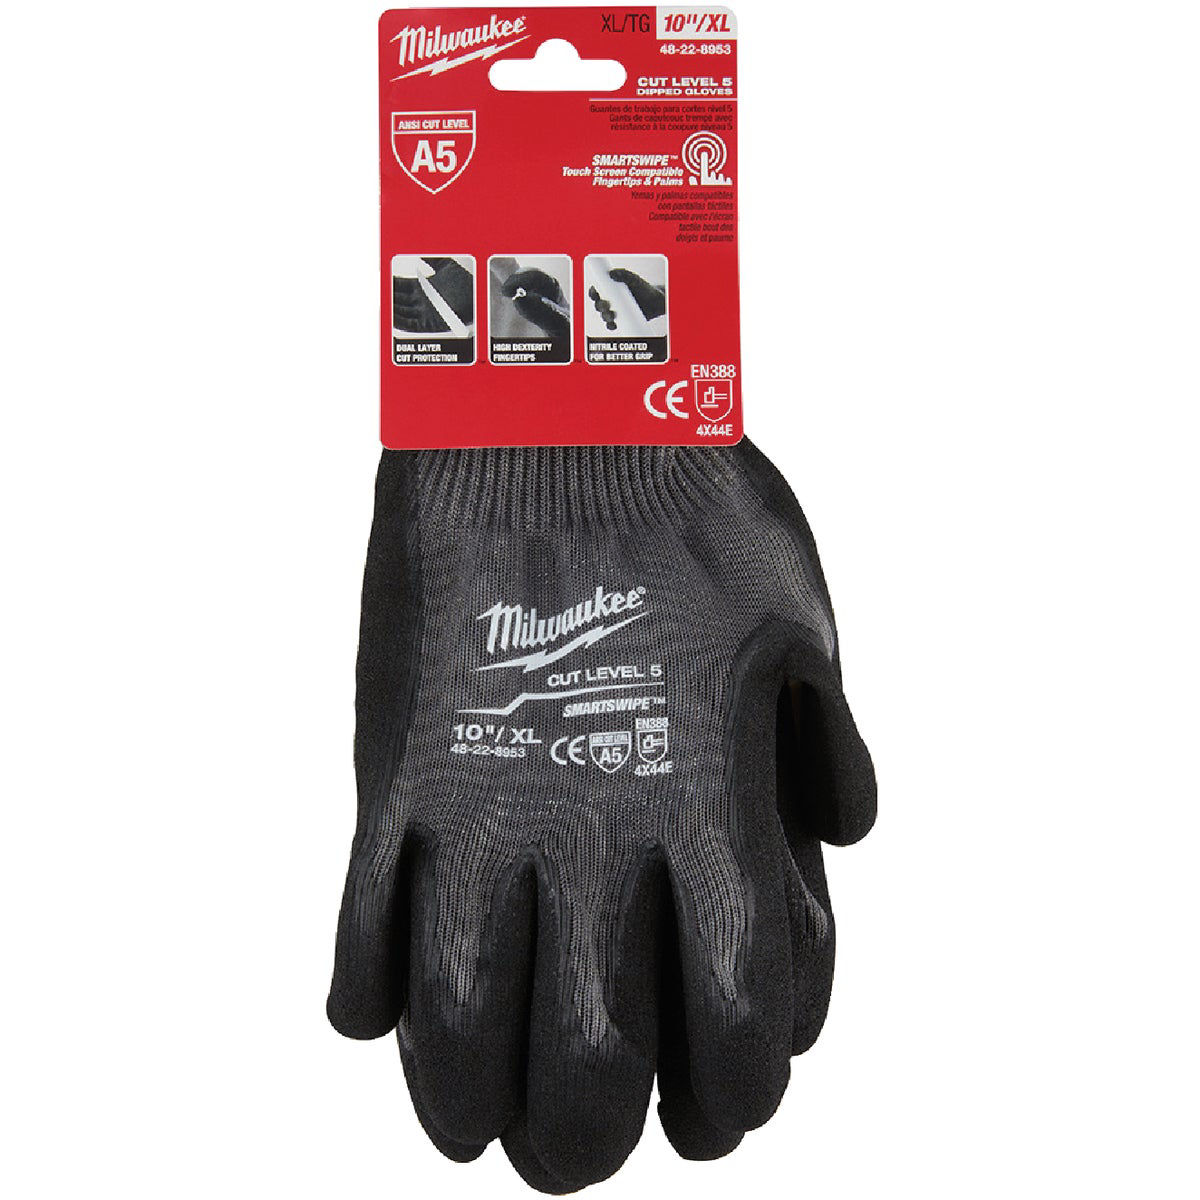 Milwaukee Cut Level 1 Nitrile Dipped Gloves - Large (12 Pack)